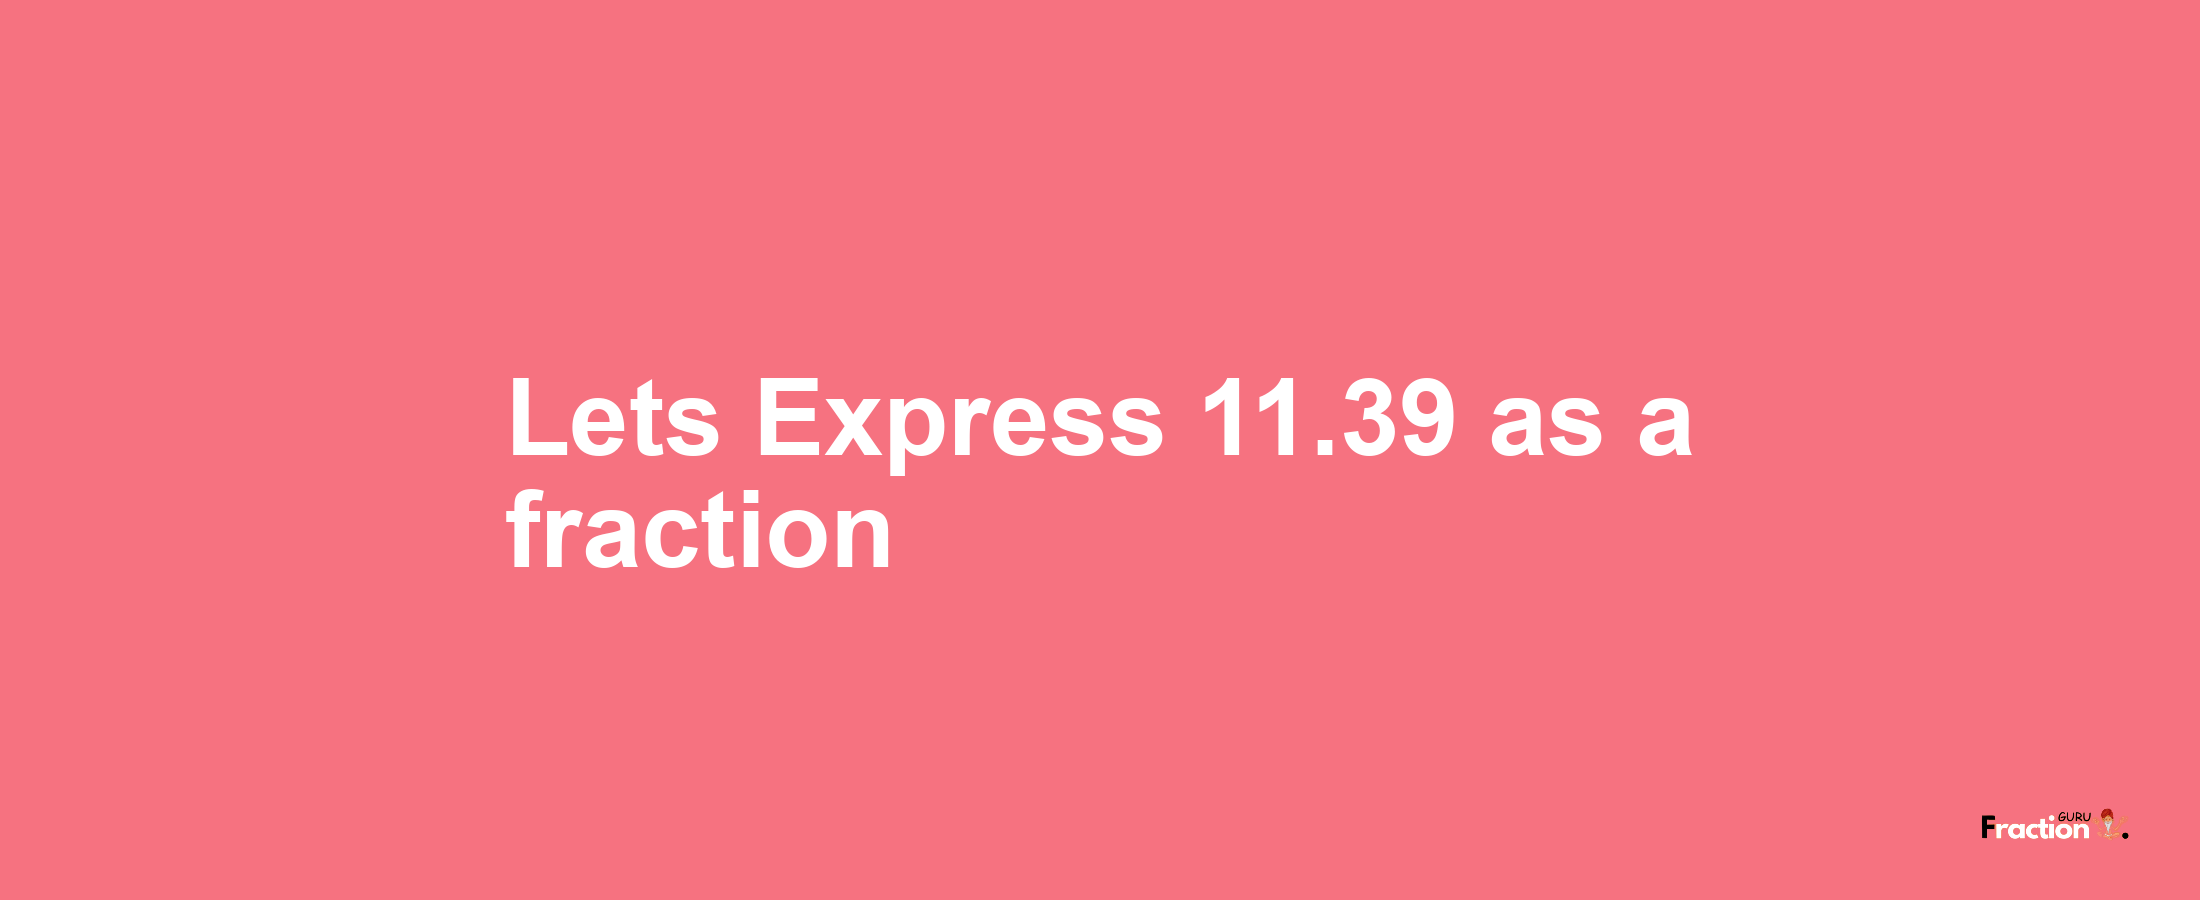 Lets Express 11.39 as afraction